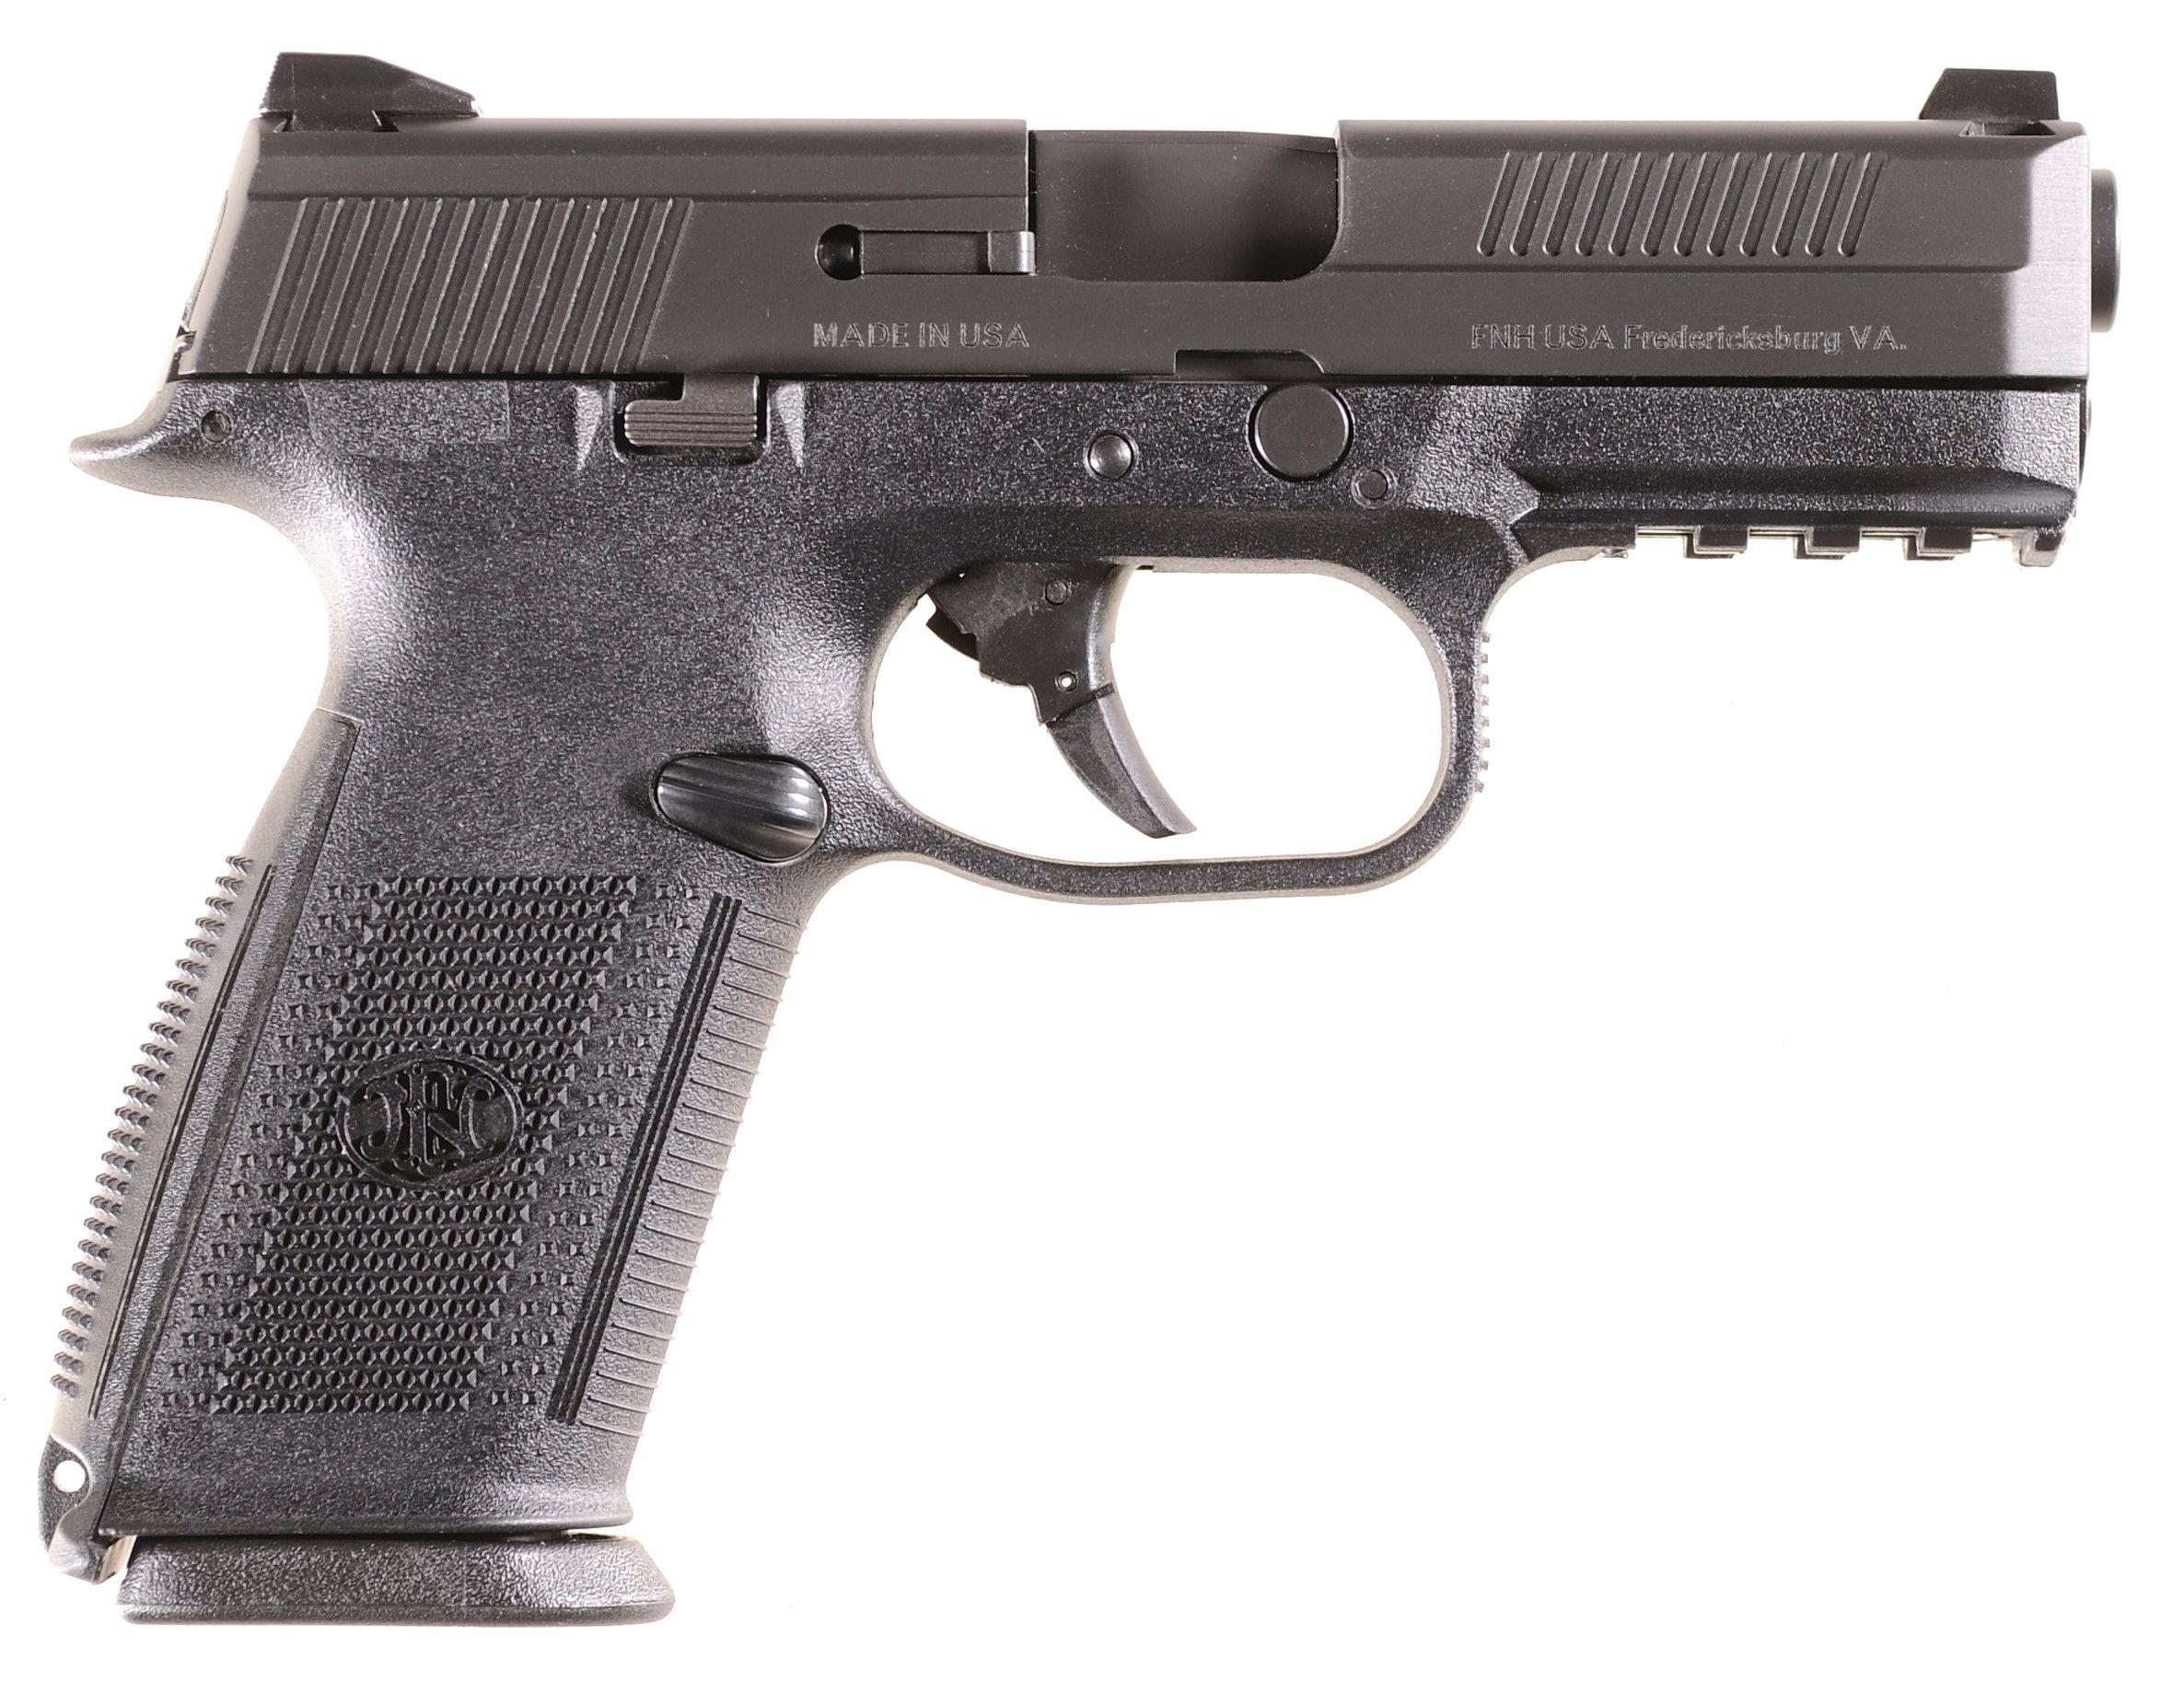 FNH USA FNS-40 Semi-Automatic Pistol with Case